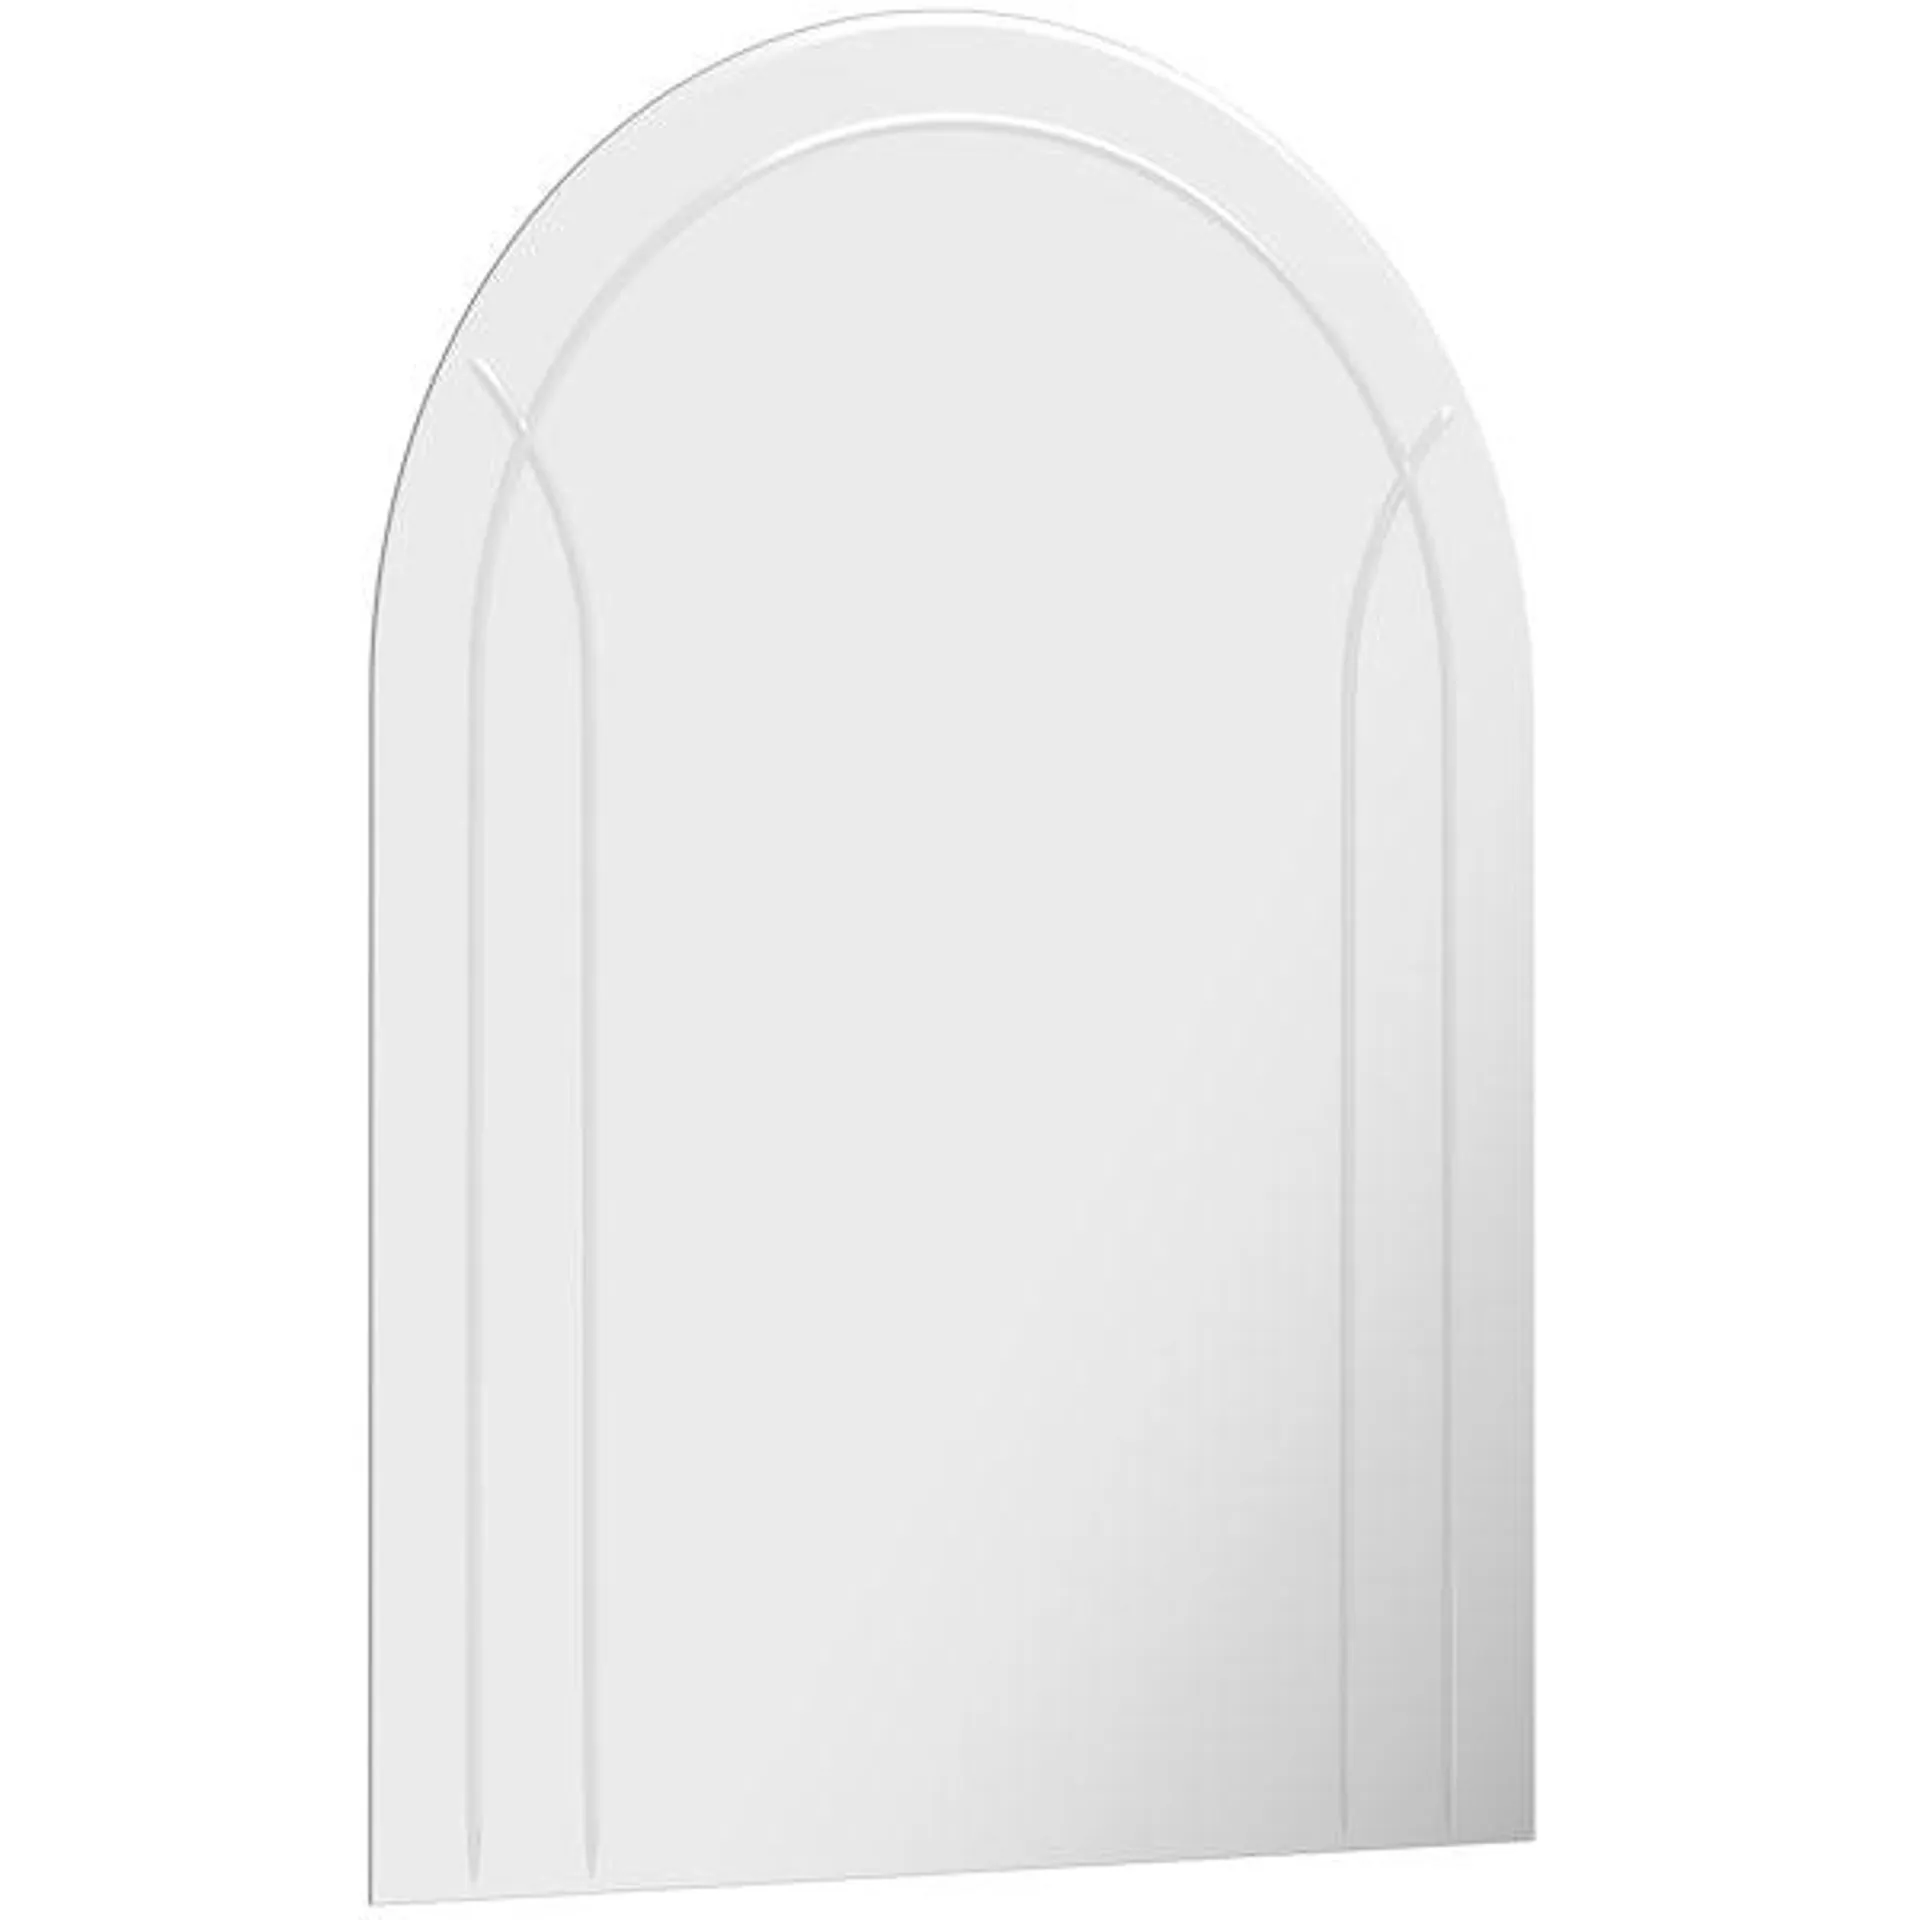 Accents bevelled edge arched mirror with with etching 60 x 45cm